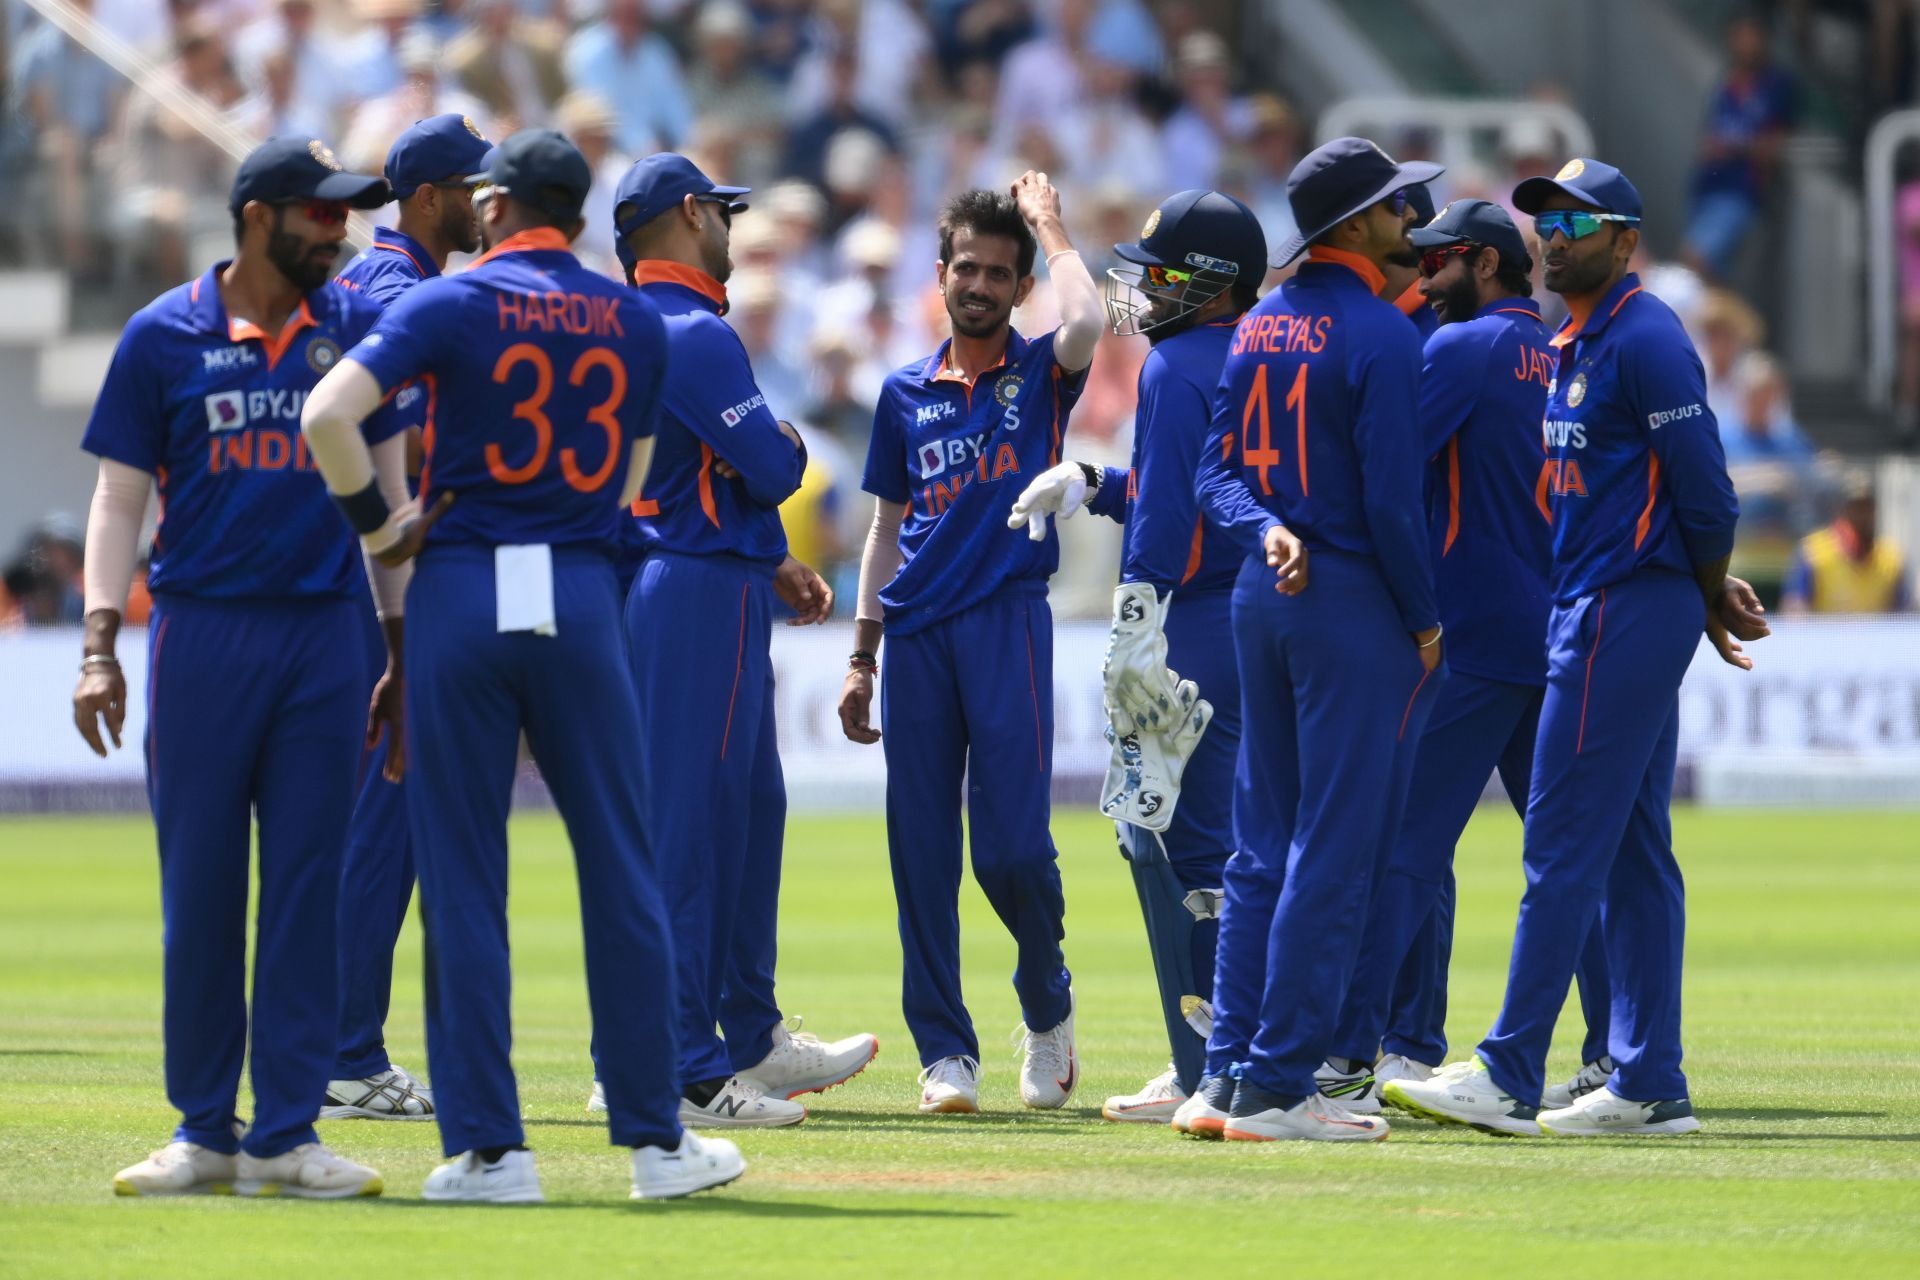 India will lock horns with Zimbabwe in a three-match ODI series.